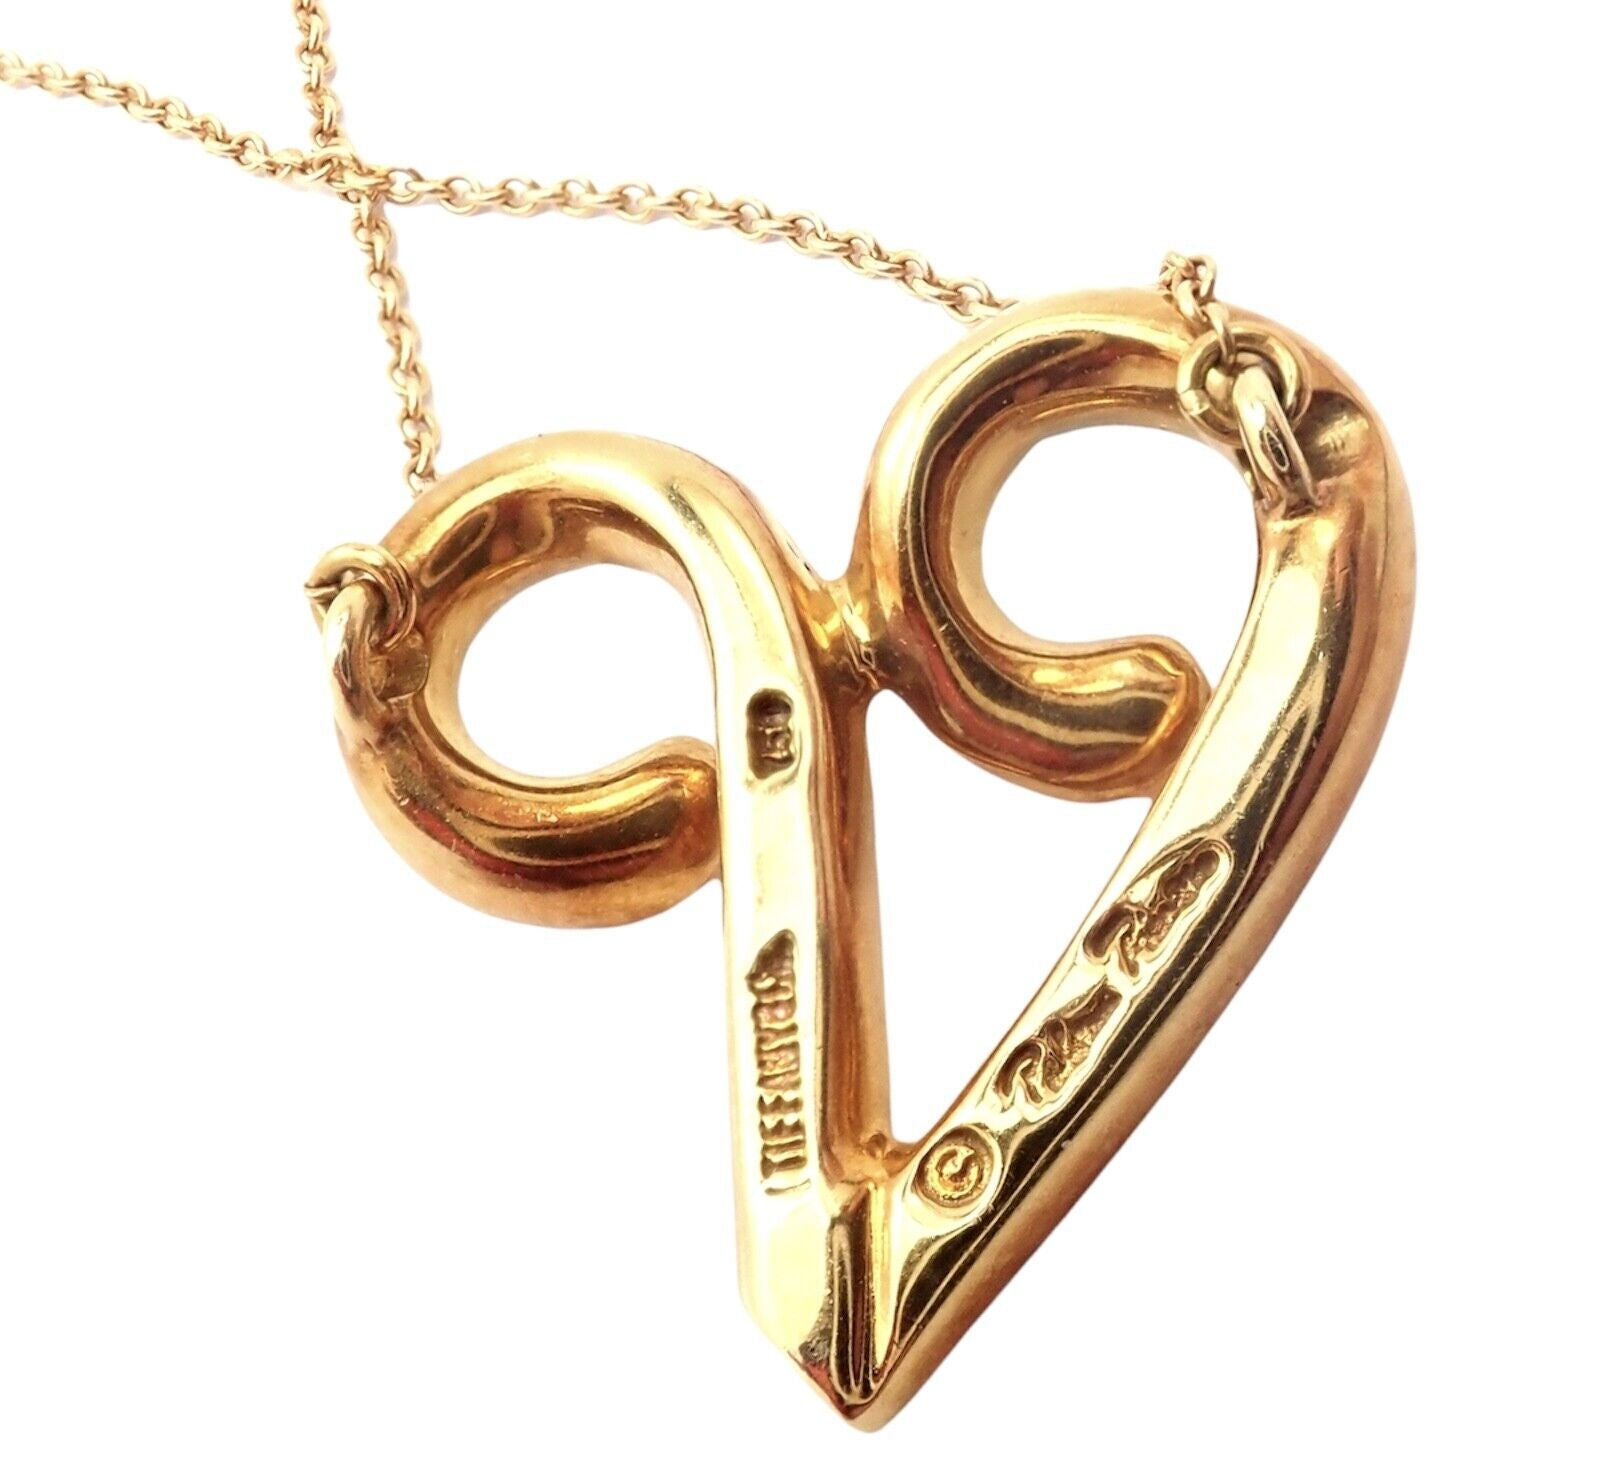 Tiffany & Co. Jewelry & Watches:Fine Jewelry:Necklaces & Pendants Tiffany & Co Picasso 18k Yellow Gold Large Zodiac Aries Pendant Necklace